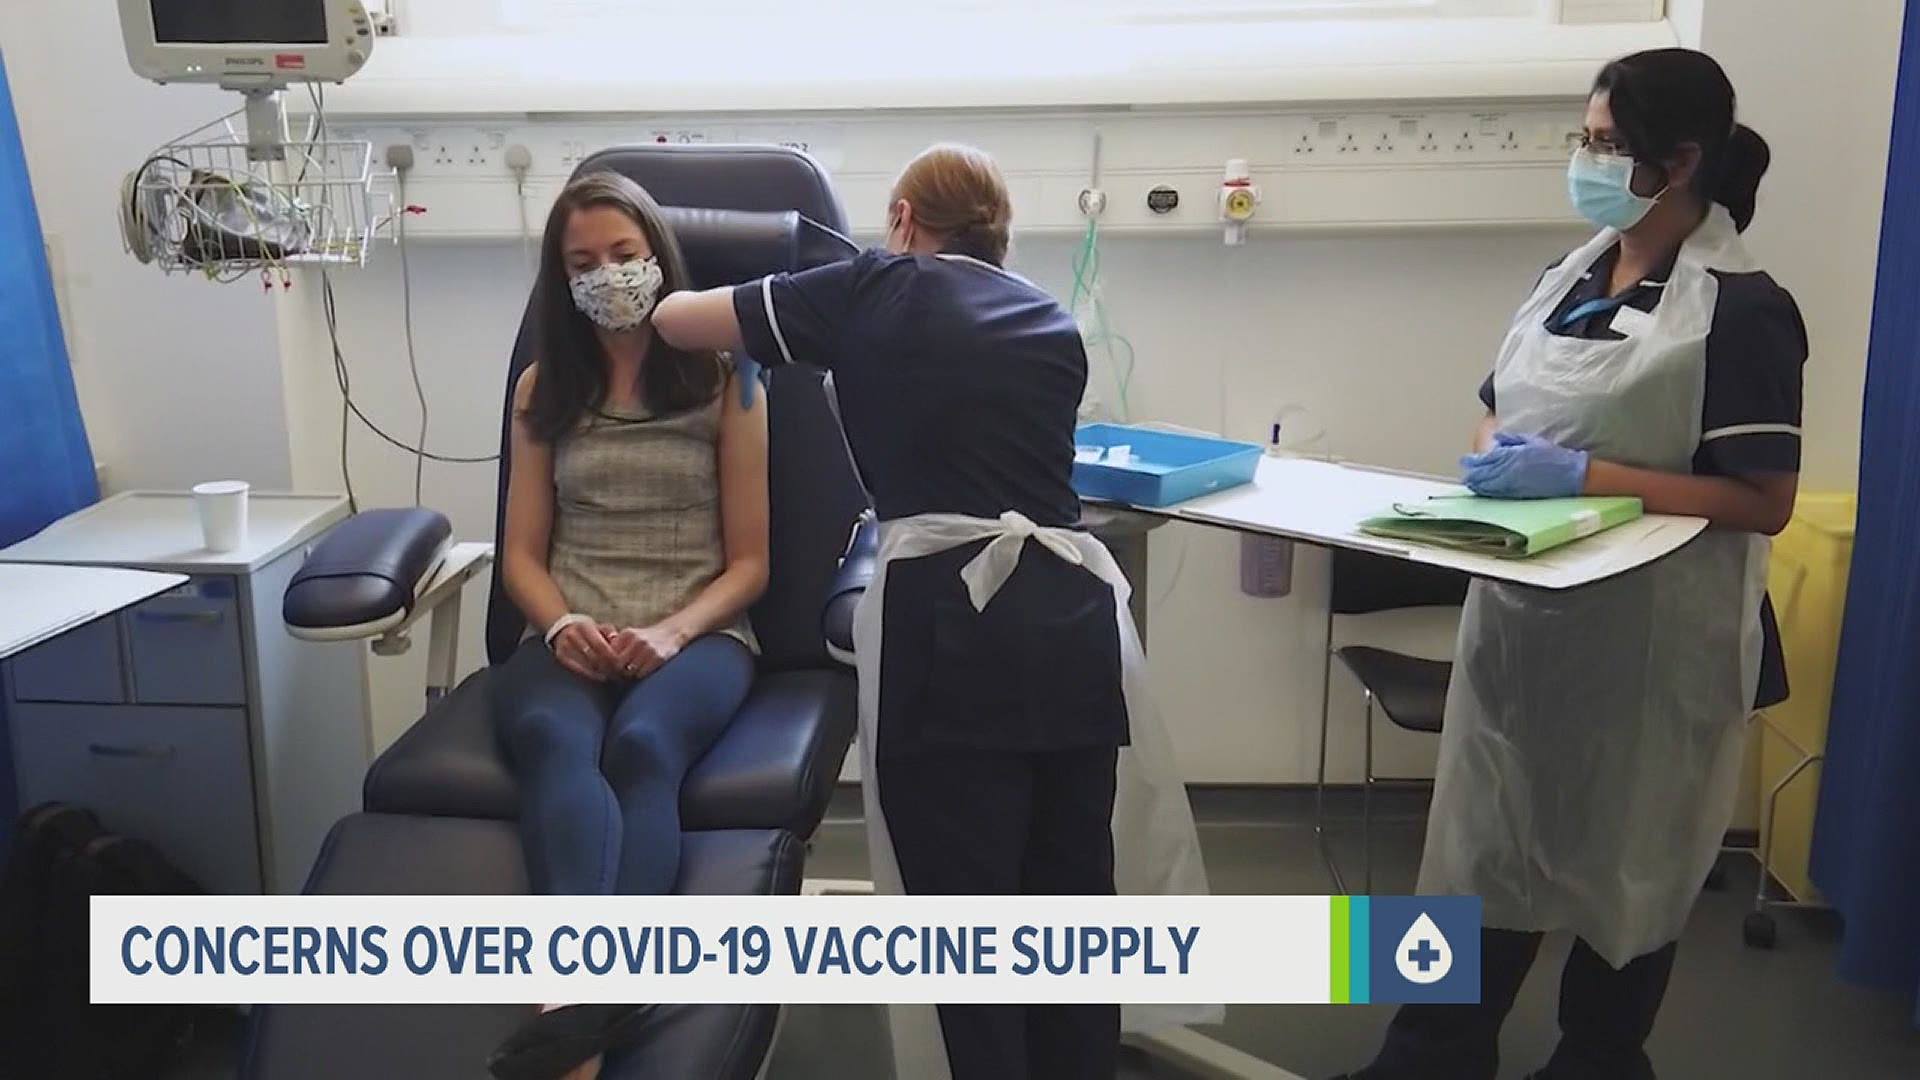 Lancaster County's mass vaccination site is set to open in early March. However, Pennsylvania is still struggling to keep up with COVID-19 vaccine demand.